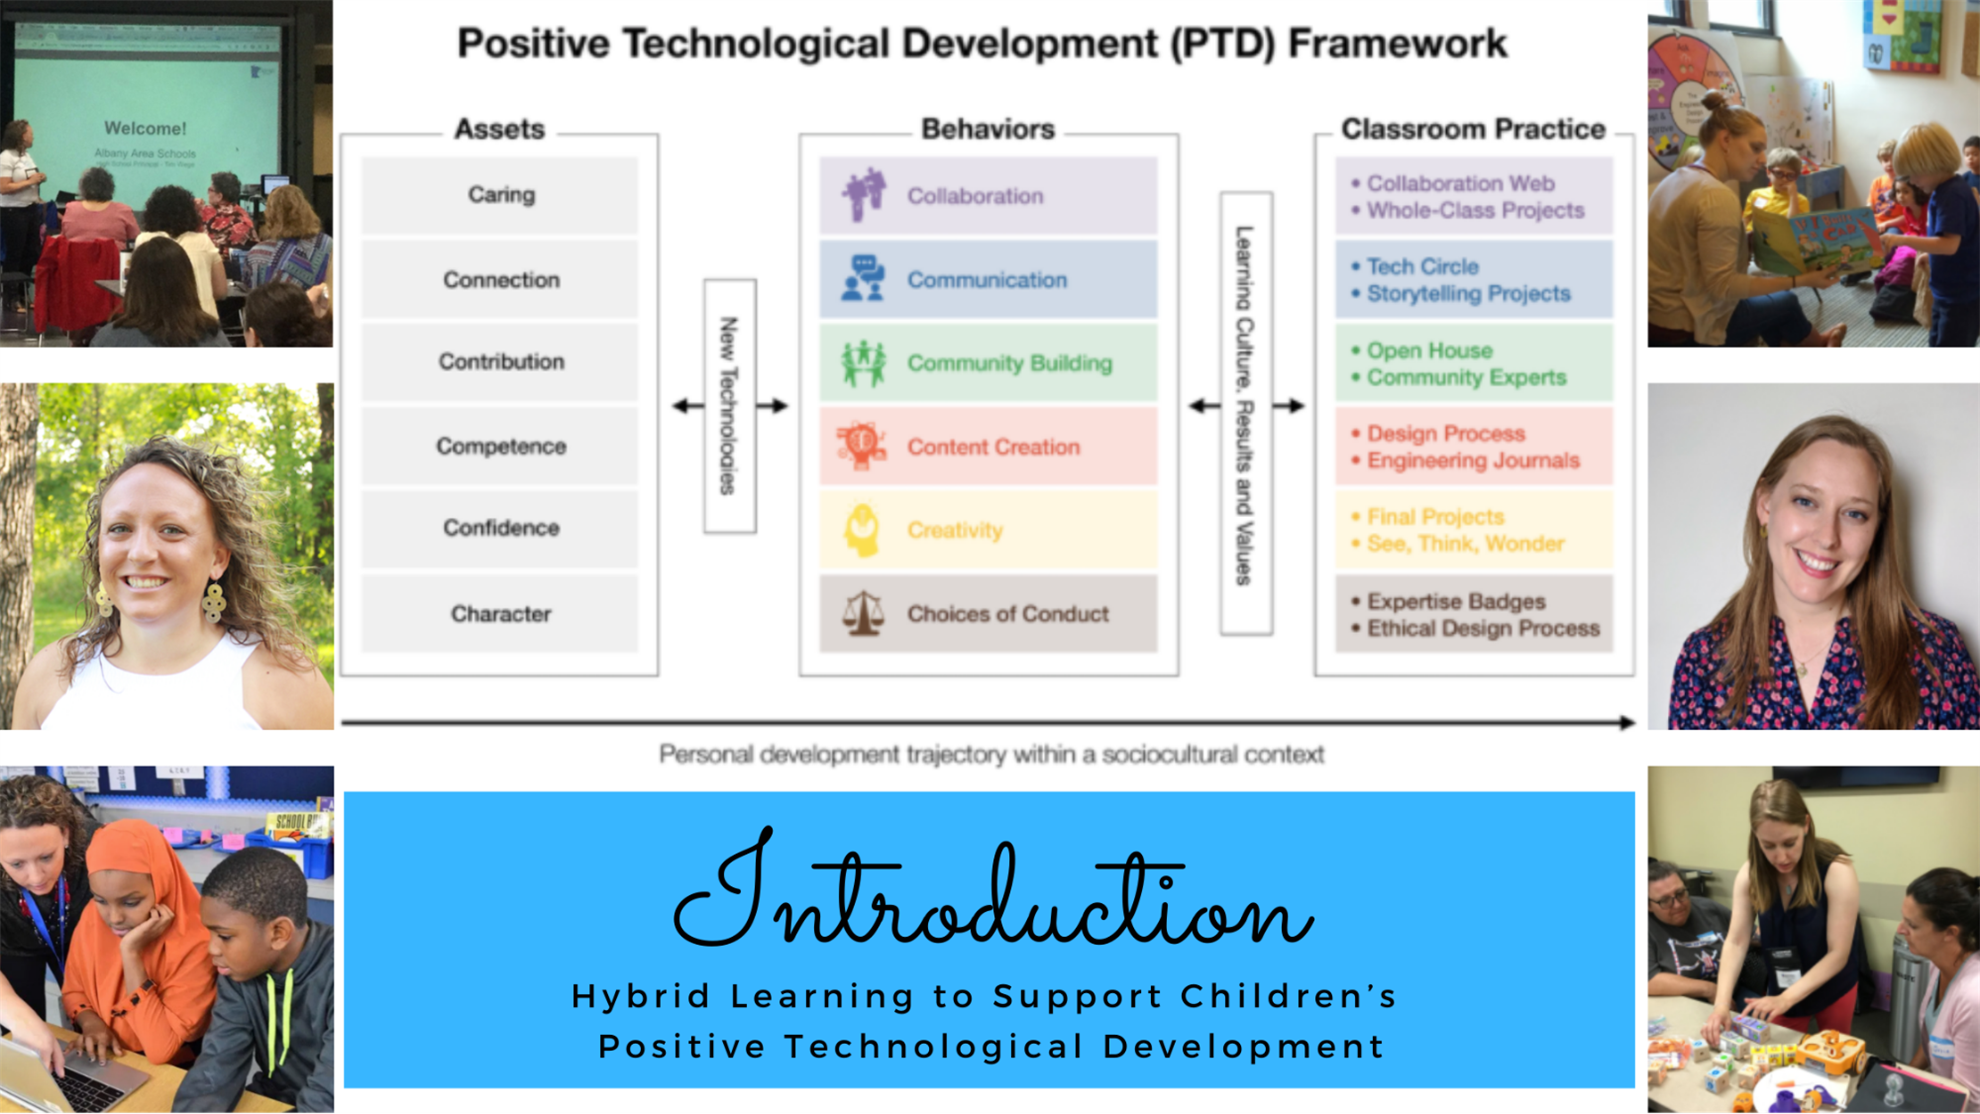 Title image
Positive technological develepment(PTD) framework.
Introduction. 
Hybrid learning to support Children's positive technological development.
Image border is decorated with headshots of authors and pictures from the classroom. 